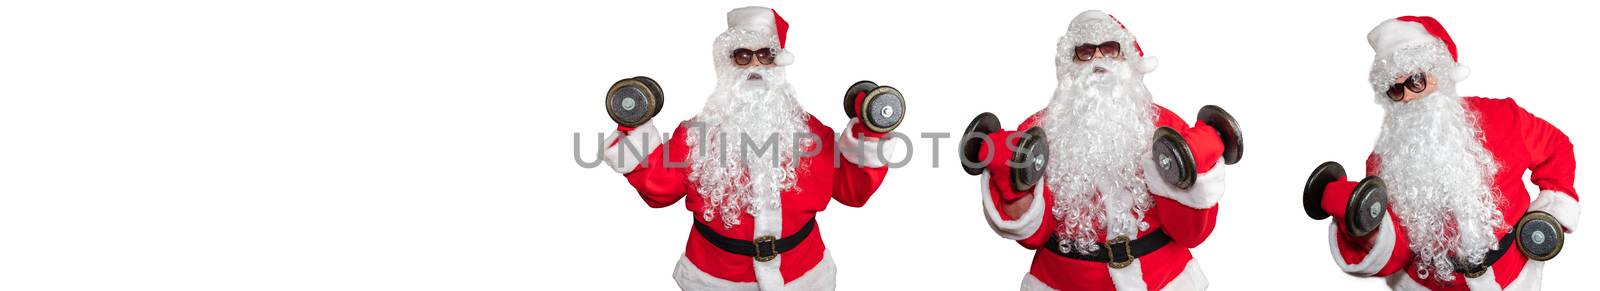 Three Santa Clauses working out, pushing and lifting dumbbells, doing bicep curls. Isolated on white background. Sport, fitness, bodybuilding conept. Banner size, copy space by DamantisZ